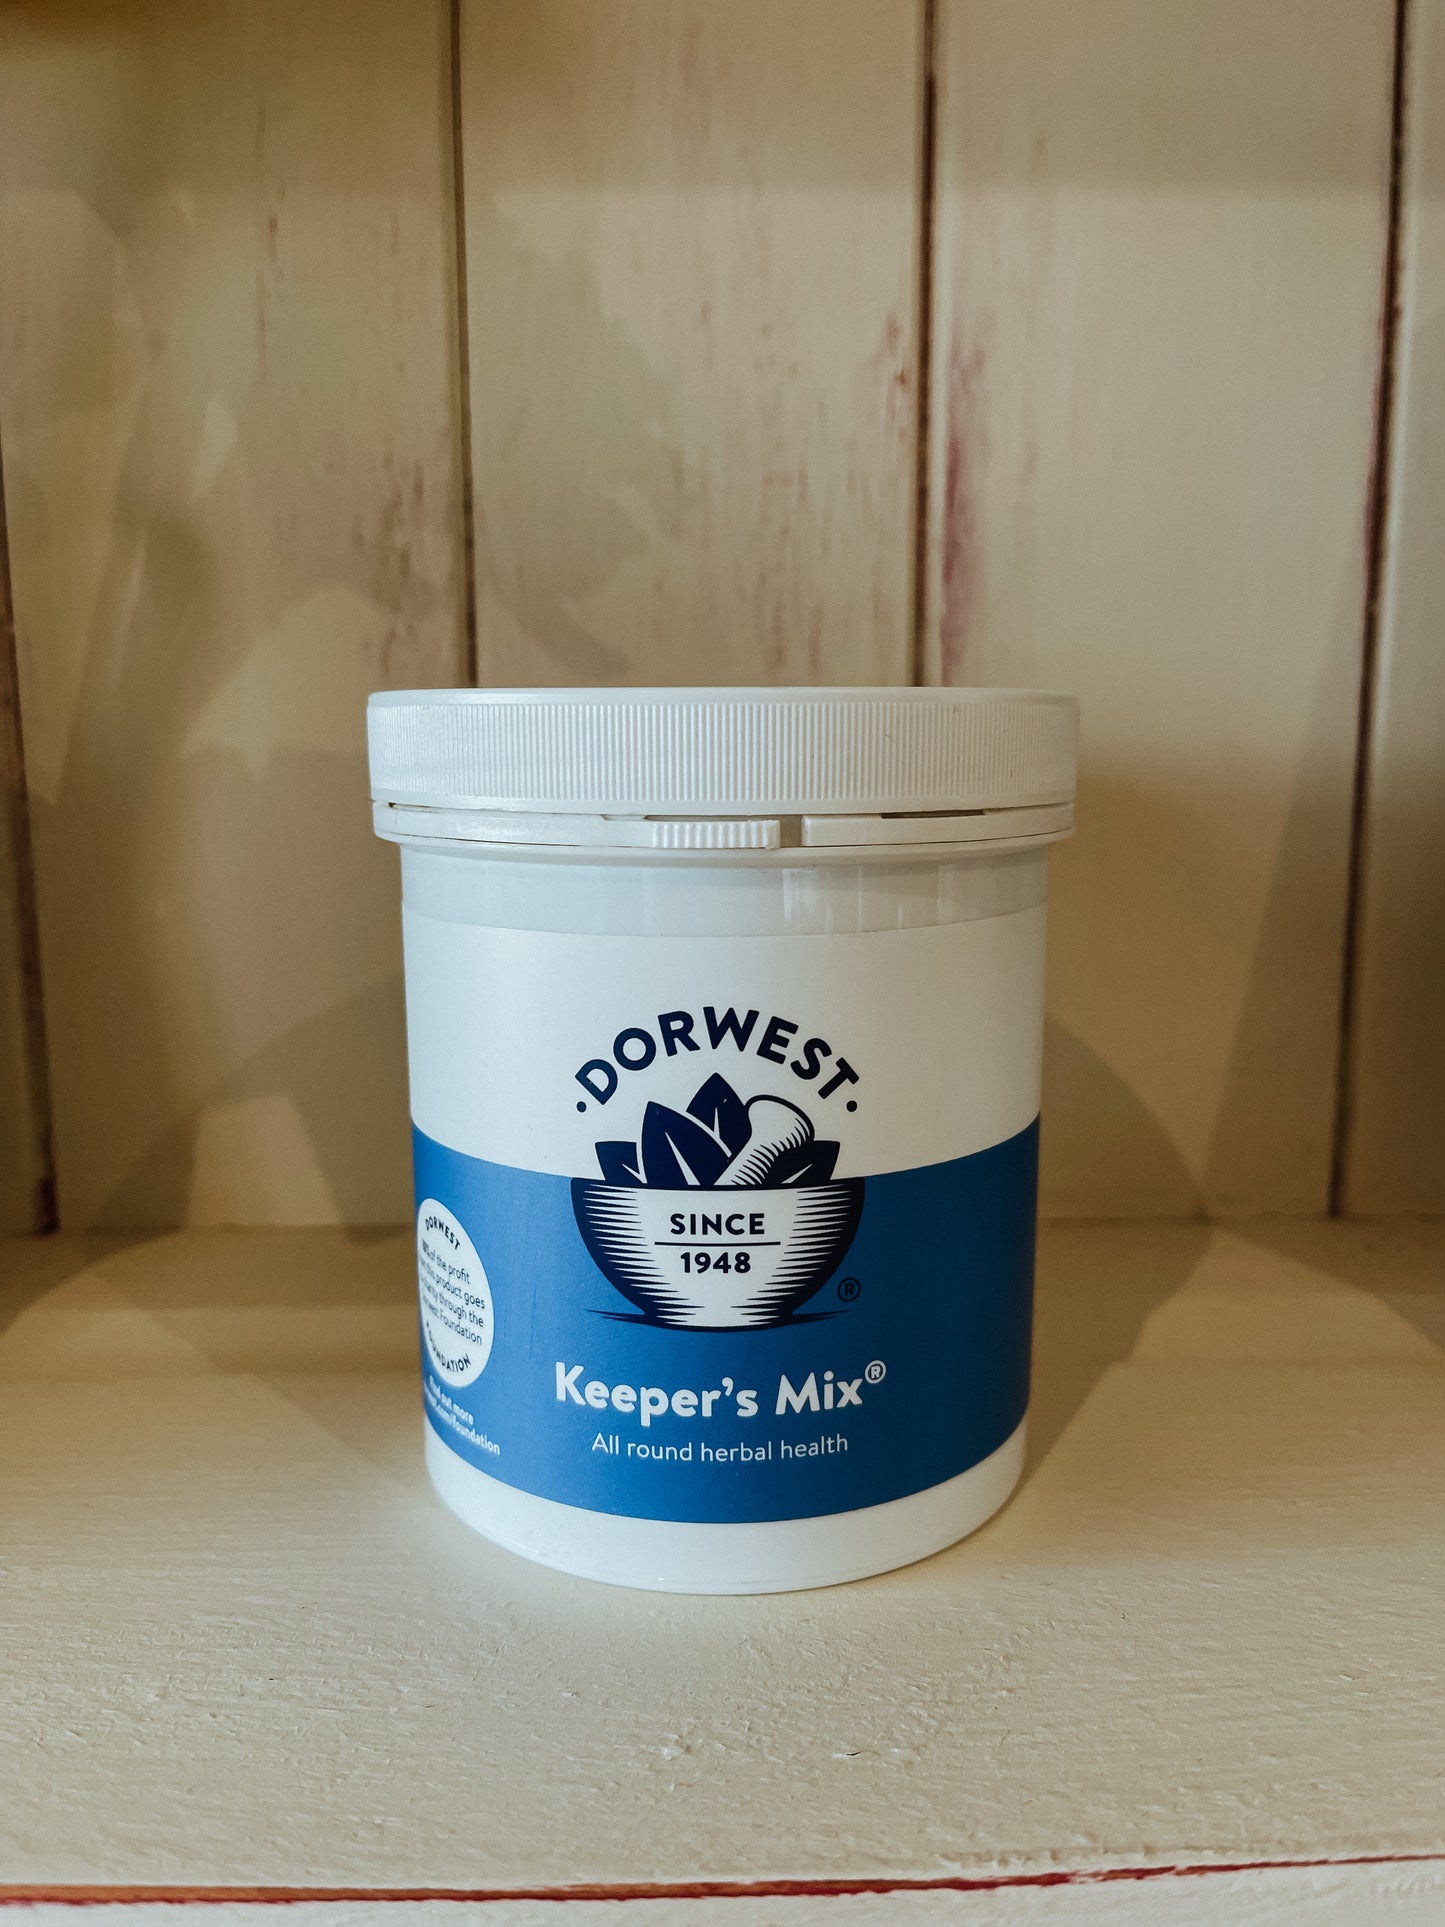 Dorwest Keeper’s Mix For Dogs & Cats